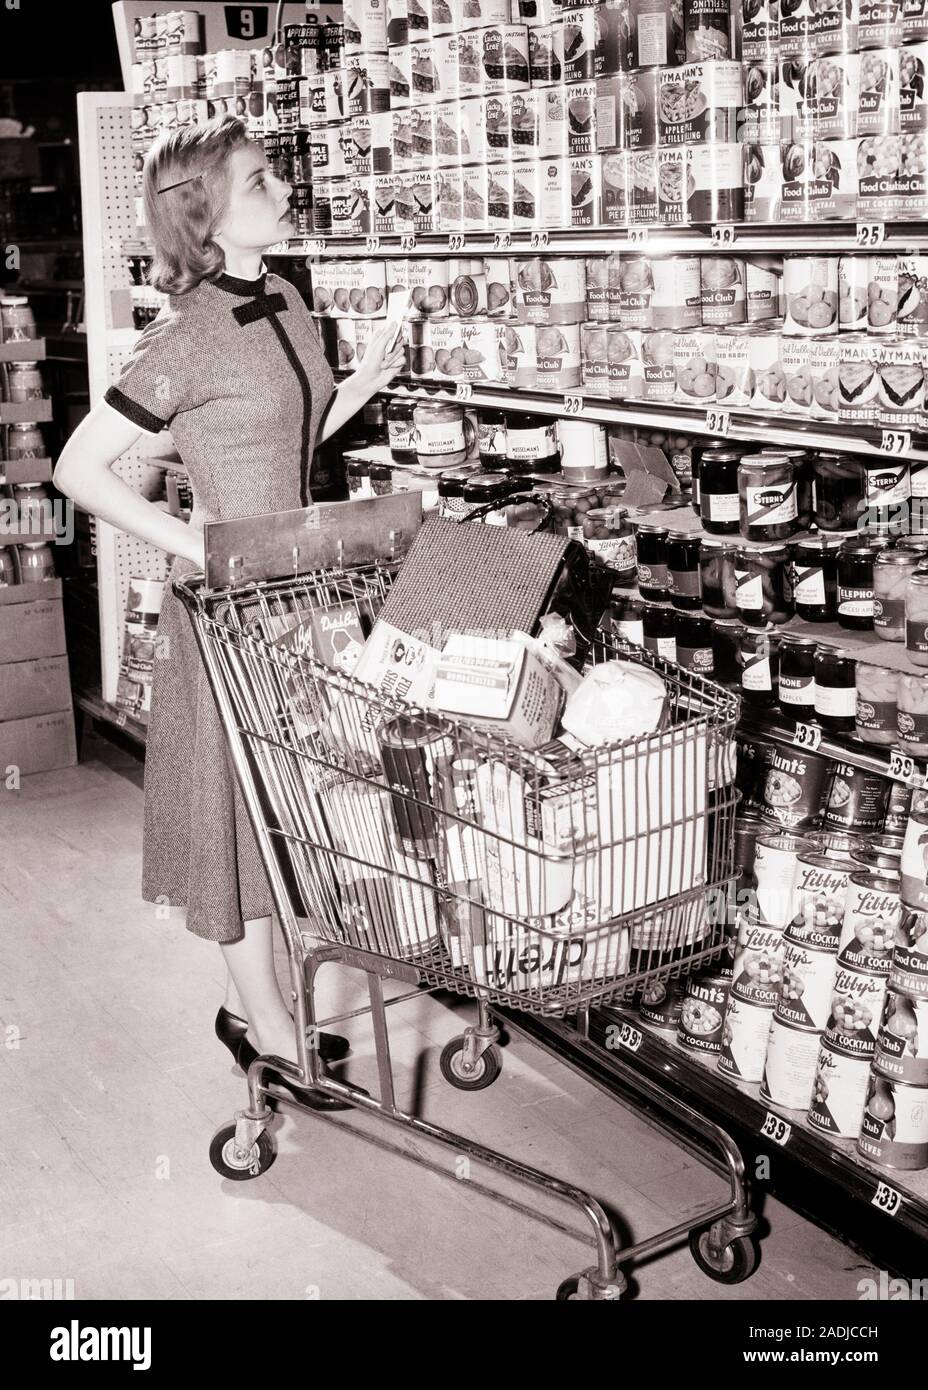 1950s 1960s WOMAN PUSHING SHOPPING CART IN GROCERY STORE HOLDING HER SHOPPING LIST AND LOOKING UP AT SHELVES OF CANNED GOODS - s2146 HAR001 HARS LIFESTYLE FEMALES AISLE HOME LIFE FULL-LENGTH LADIES PERSONS INSPIRATION B&W CANNED SHOPPER GOALS HOMEMAKER SHOPPERS HOMEMAKERS GOODS AND CHOICE AT IN OF UP HOUSEWIVES CONCEPTUAL STYLISH LOOKING UP YOUNG ADULT WOMAN BLACK AND WHITE CAUCASIAN ETHNICITY HAR001 OLD FASHIONED Stock Photo